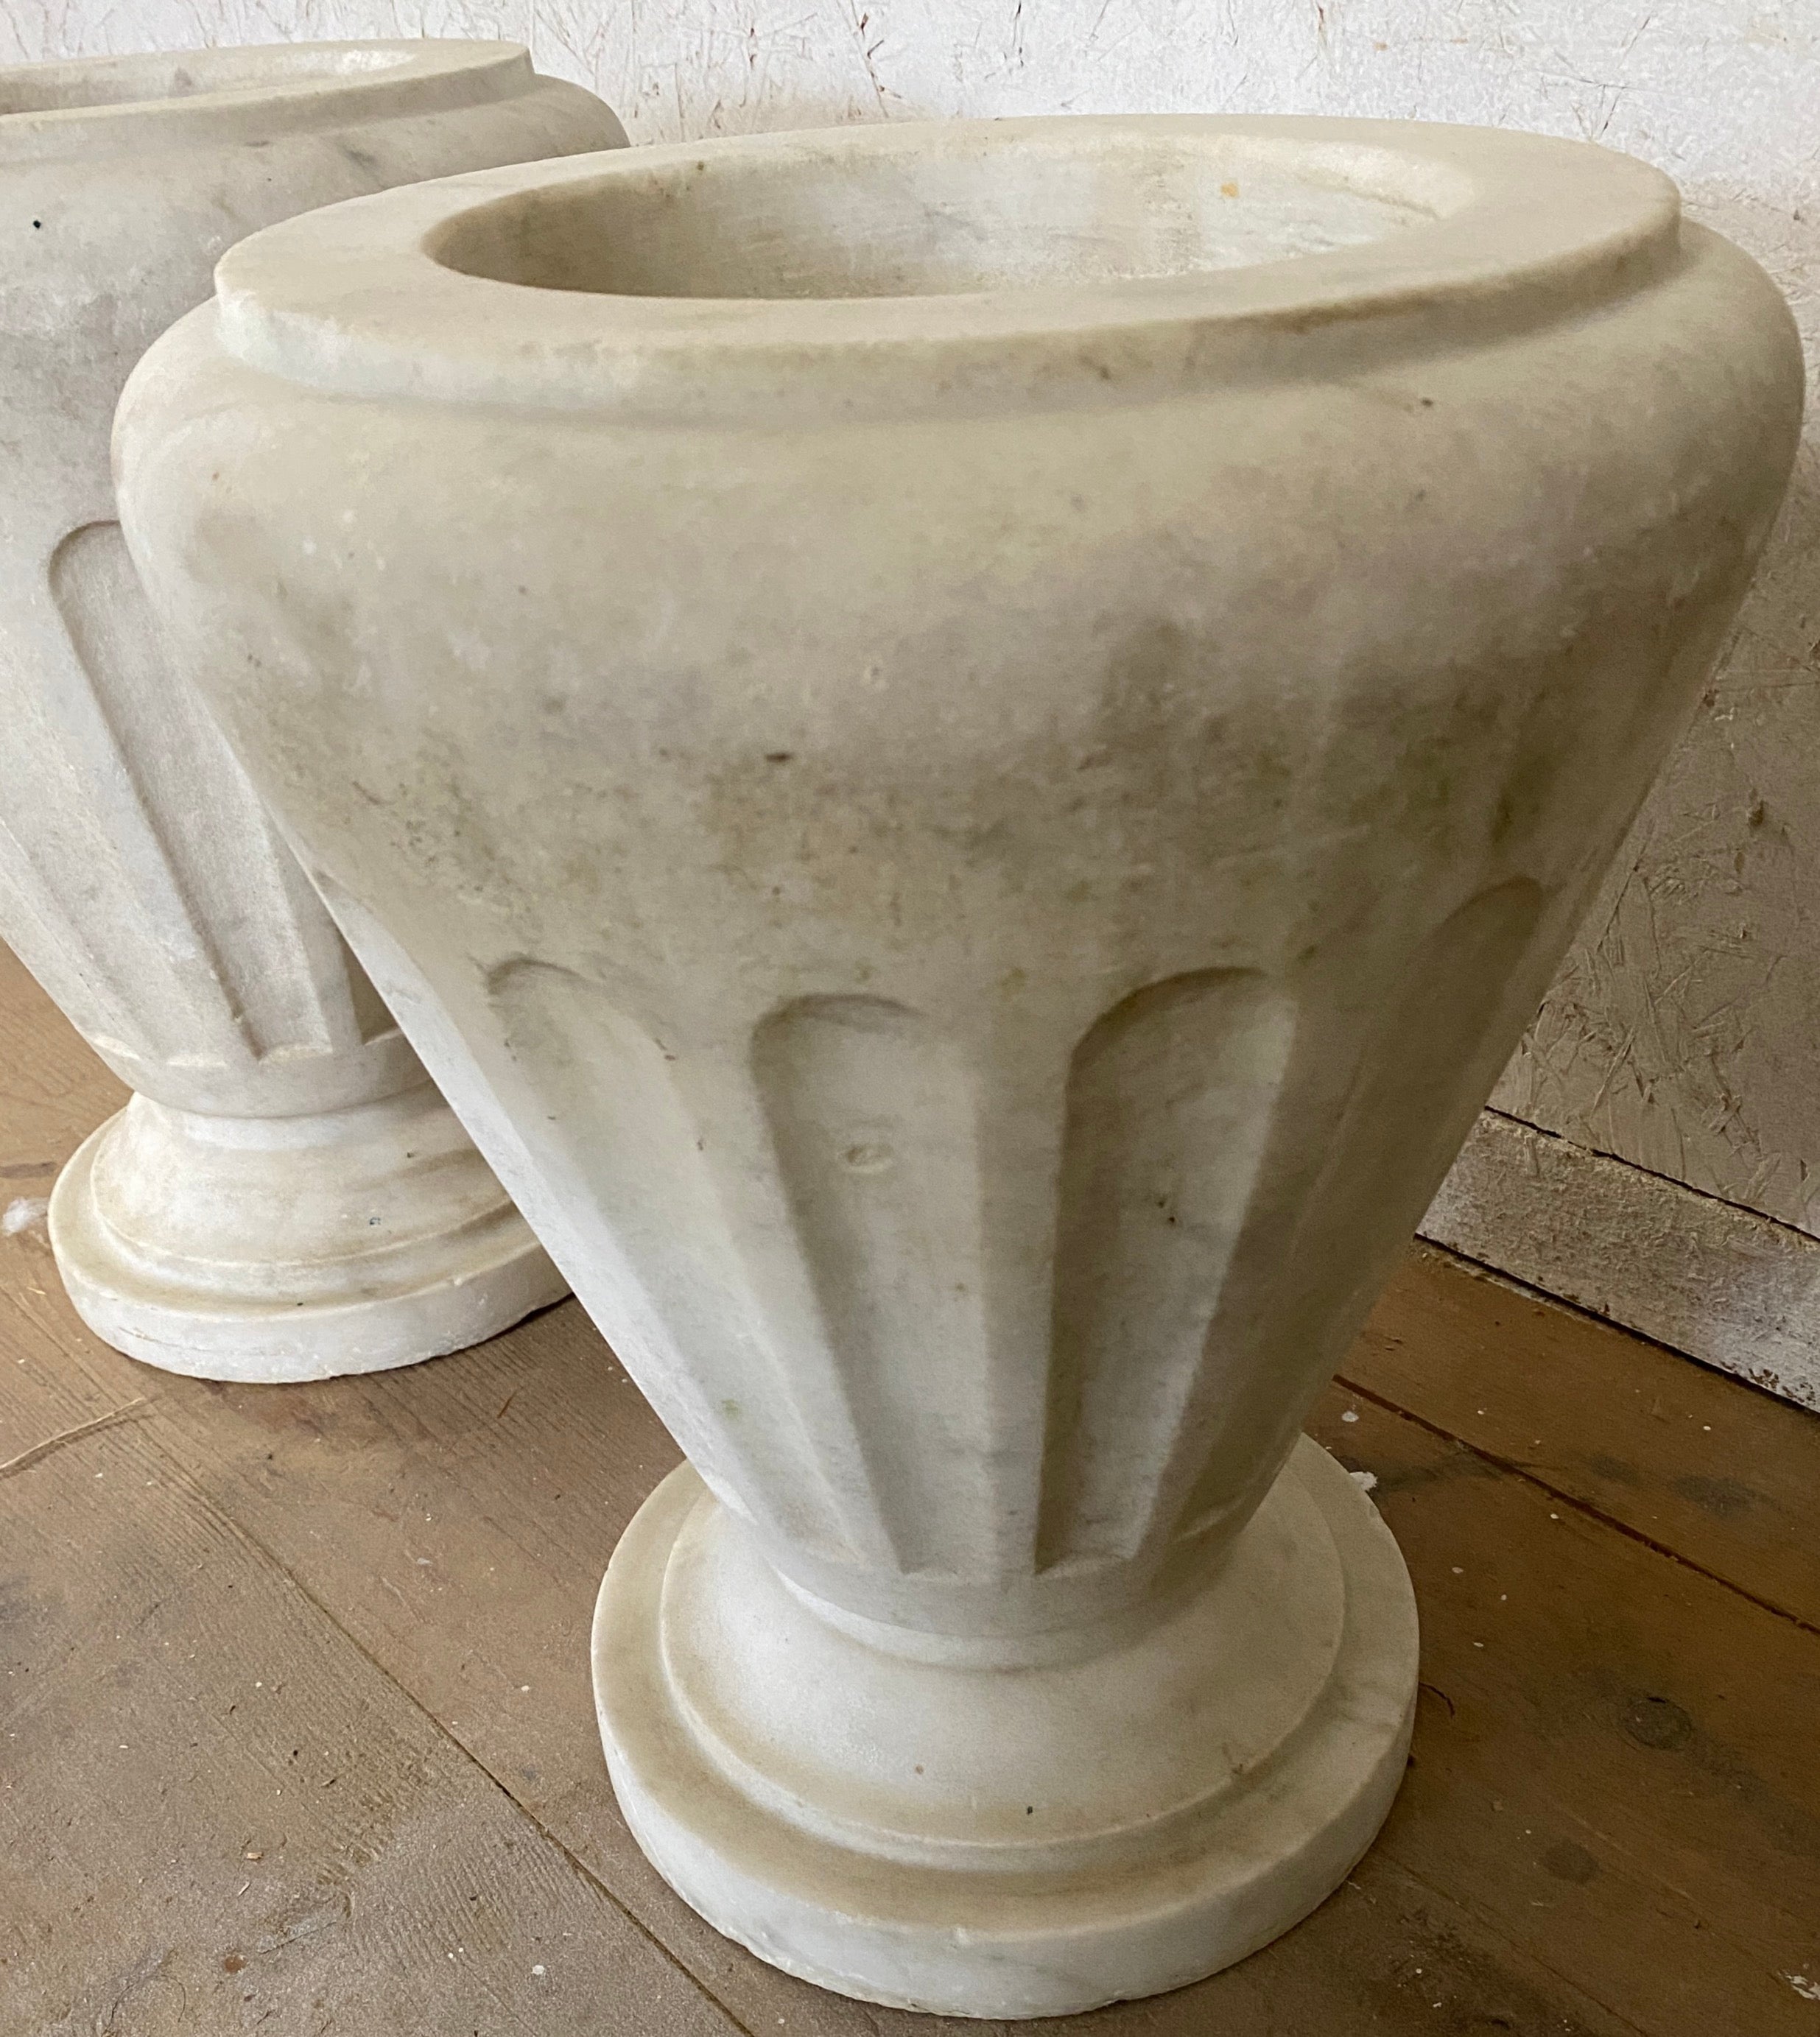 A most attractive pair of Italian Neo-Classical style white Carrara marble urns. Elegant fluted bodies giving it both a clean modern and yet classical look.  Marble shows aged patina giving it character only time is able to provide.  Highly